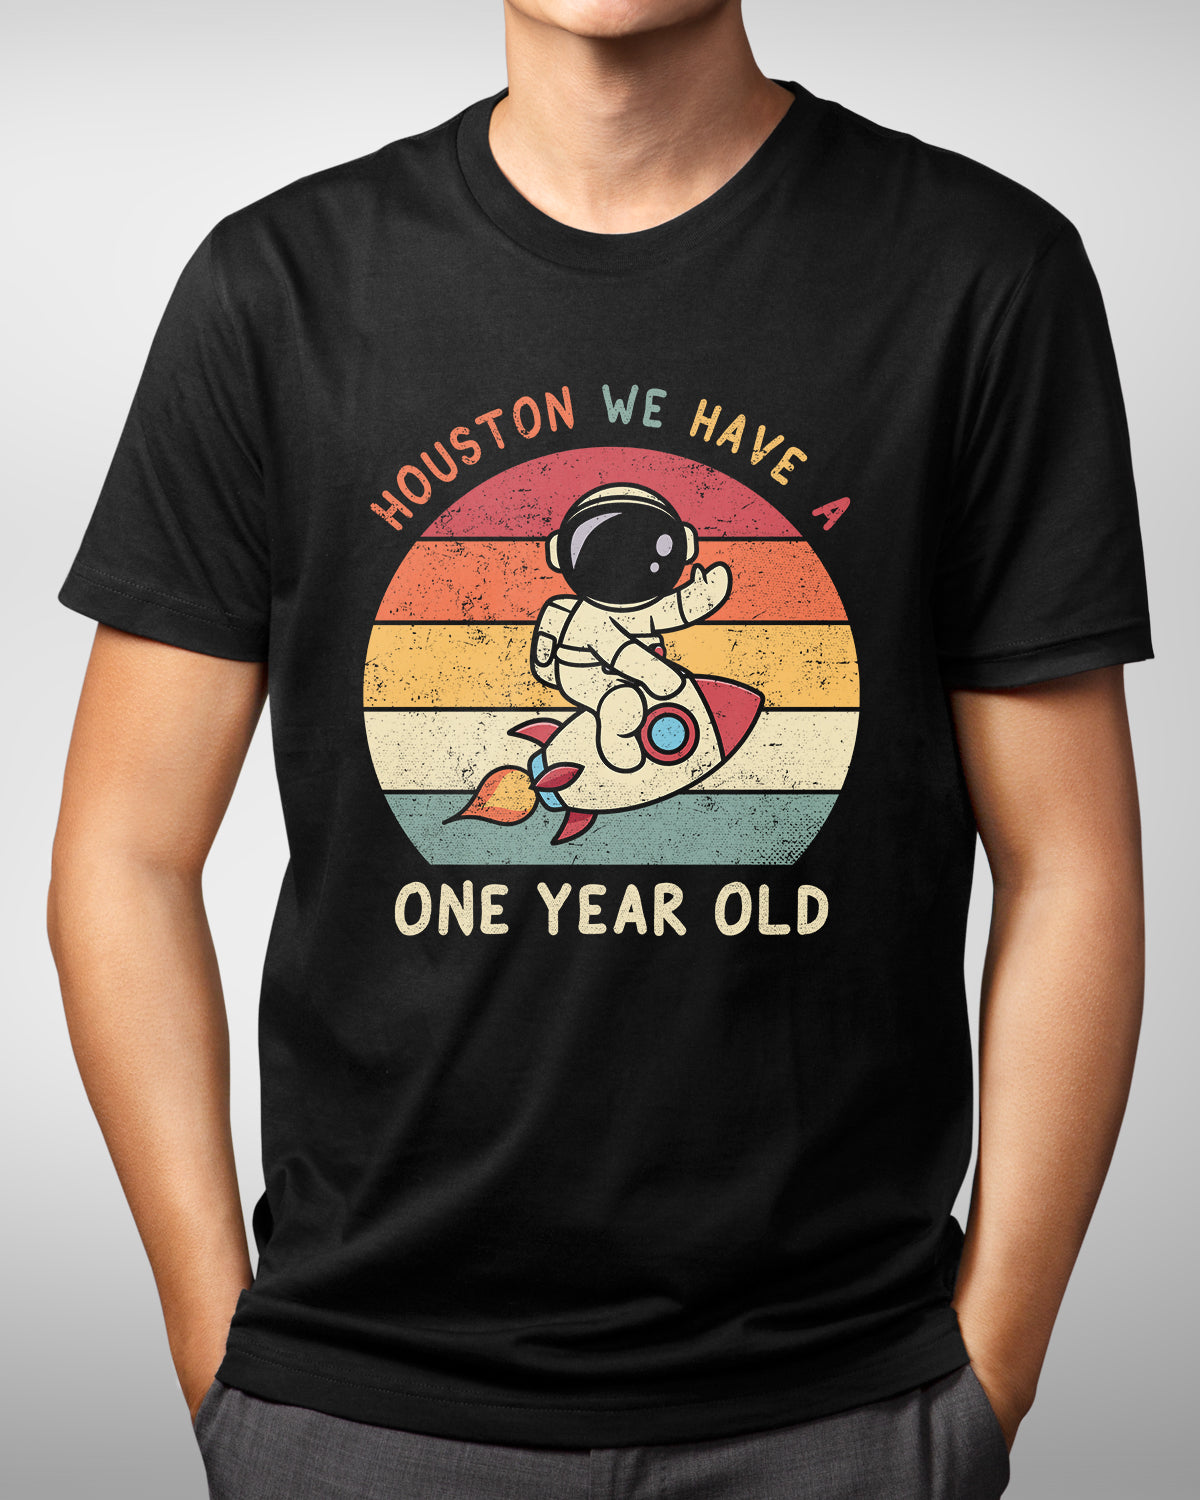 Houston We Have A One Year Old Shirt, Astronaut 1st Birthday Tee, Rocket Theme, Matching Family Outfits, Mom of Birthday Boy, Outer Space Celebration Shirt